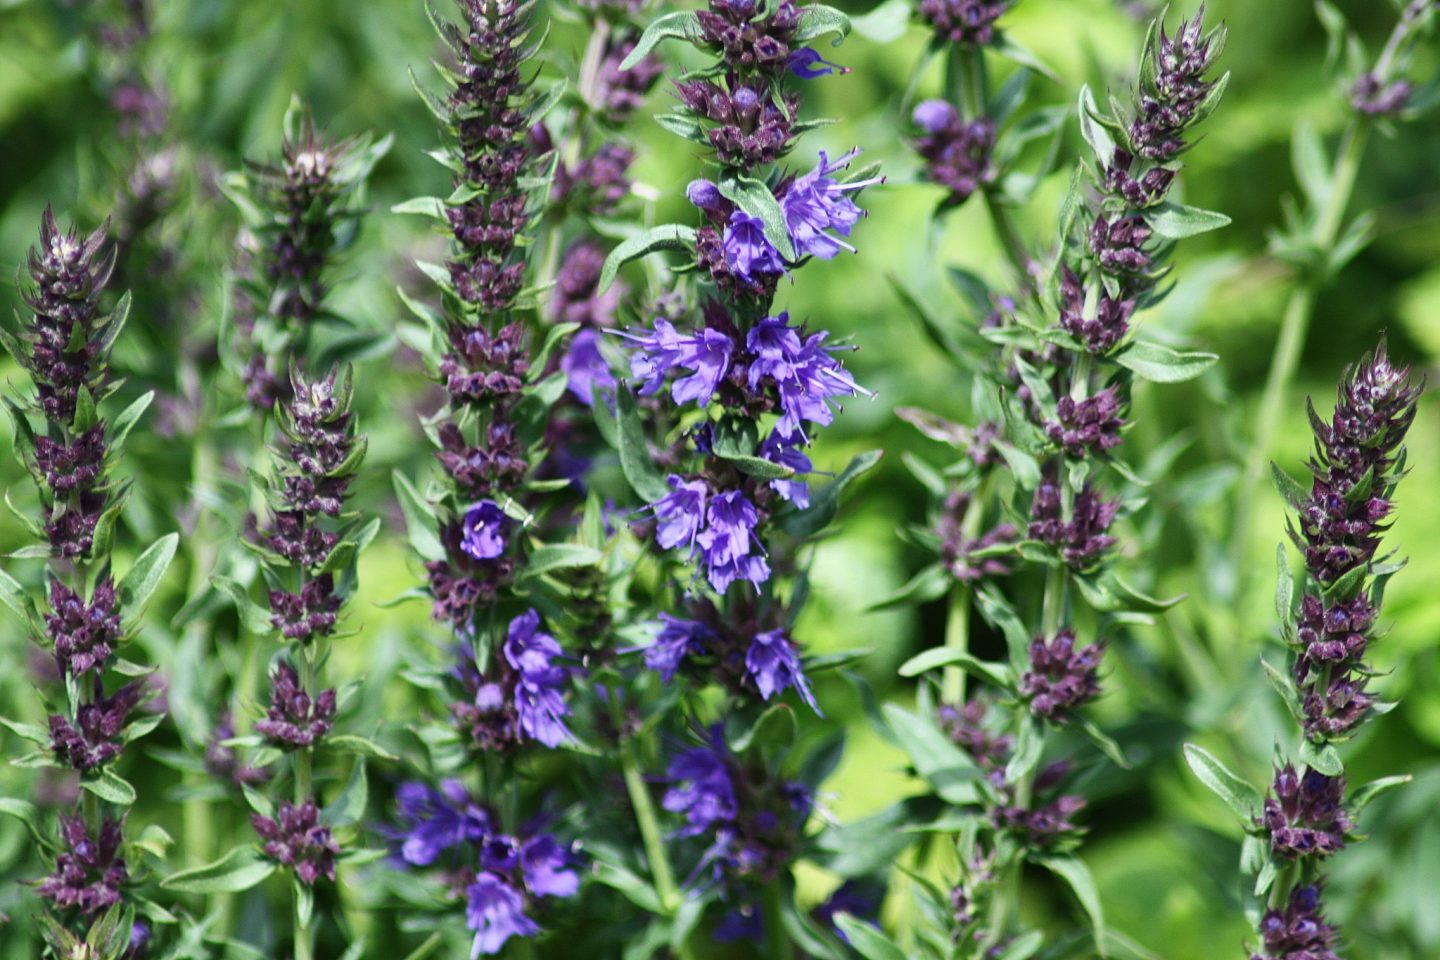 The hyssop, native to Middle East and Southern Europe, has antiseptic and medicinal qualities. Photo by Lotus Johnson on Flickr.